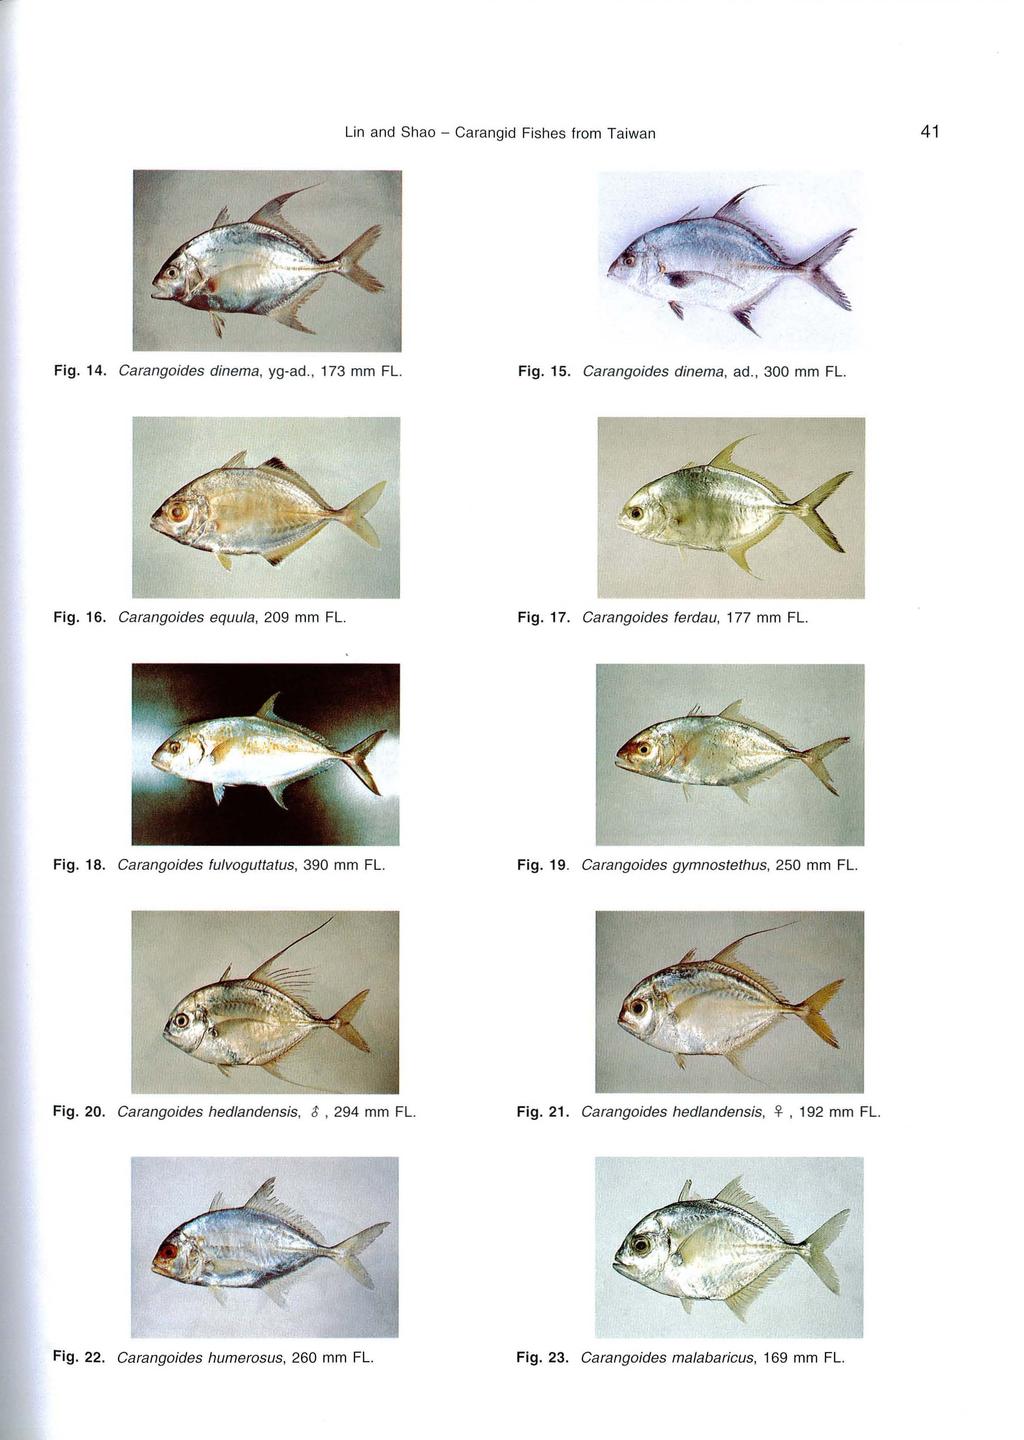 Lin and Shao - Carangid Fishes from Taiwan 4 1 Fig. 14. Carangoides dinema, yg-ad., 173 mm FL. Fig. 15. Carangoides dinema, ad., 300 mm FL. Fig. 16. Carangoides equula, 209 mm FL. Fig. 17. Carango ides ferdau, 177 mm FL.